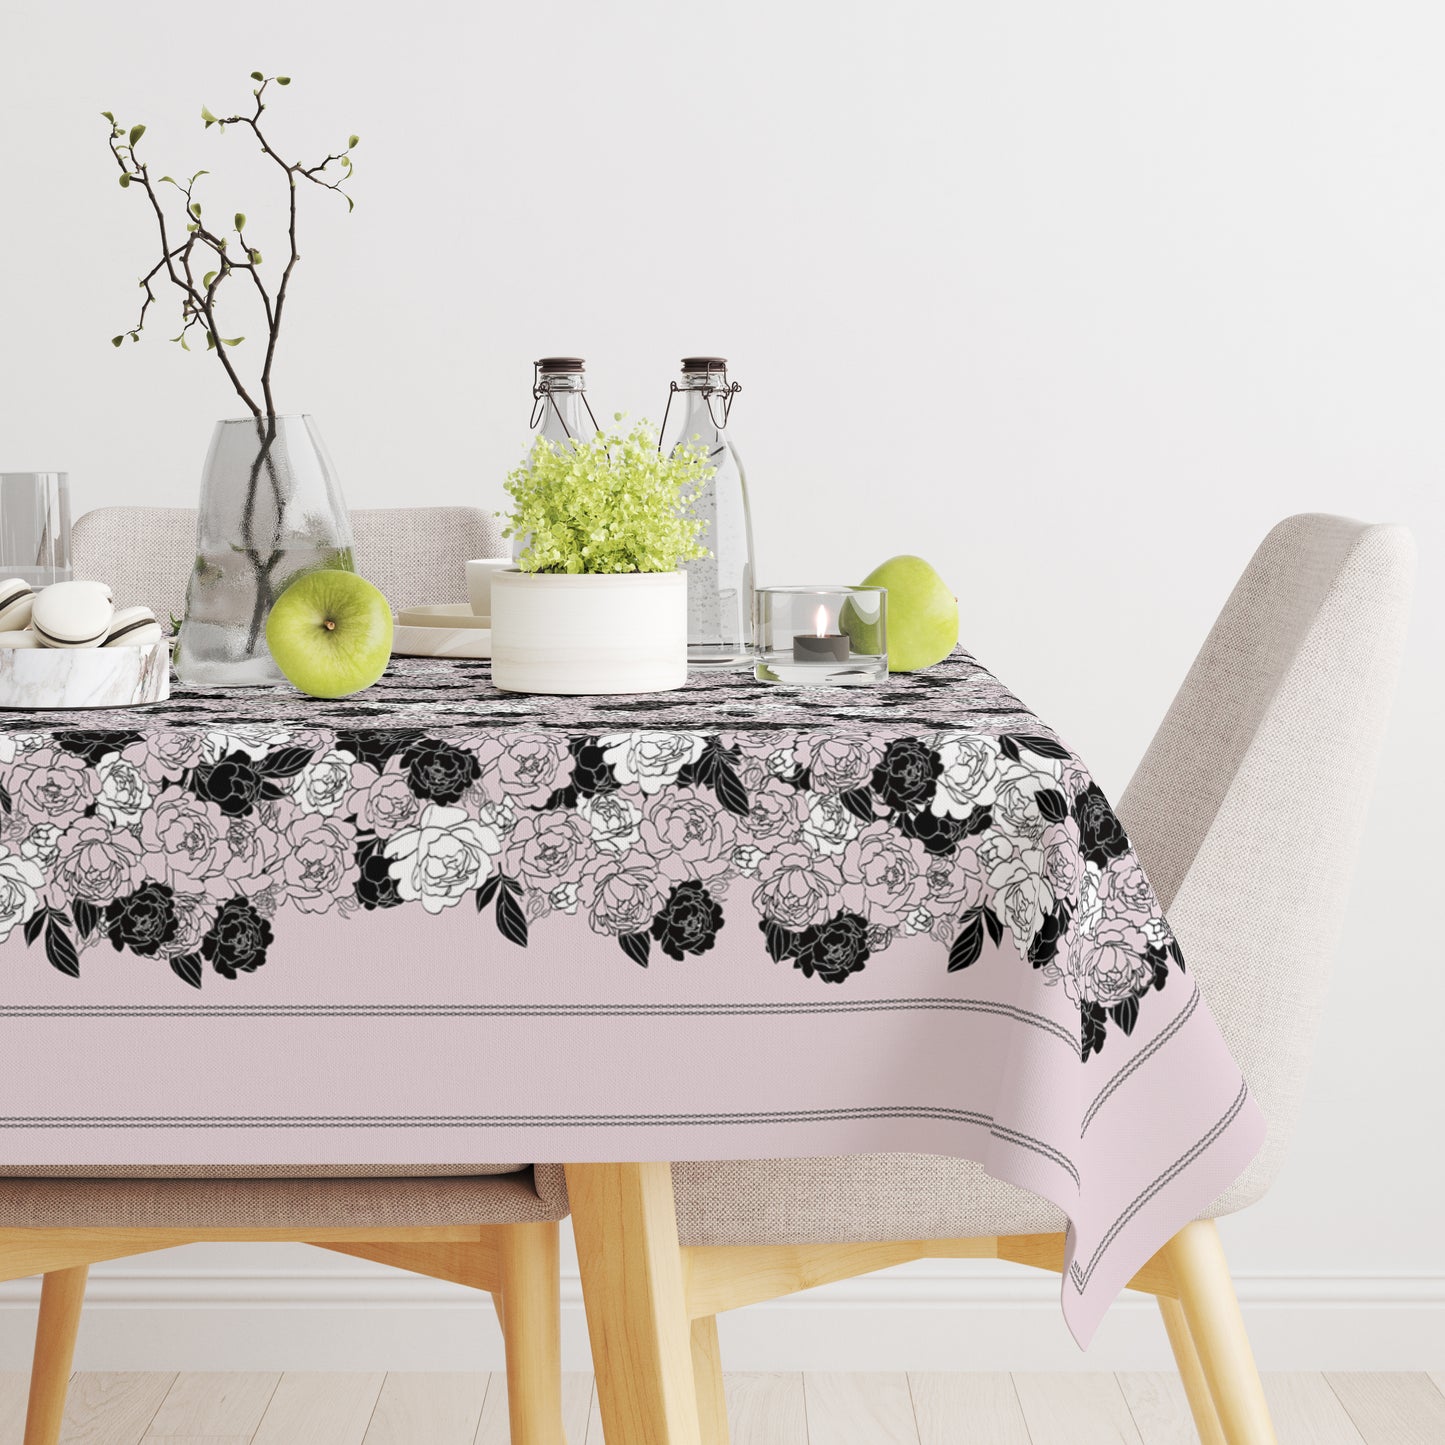 "Classy and Fabulous" Waterproof Tablecloth